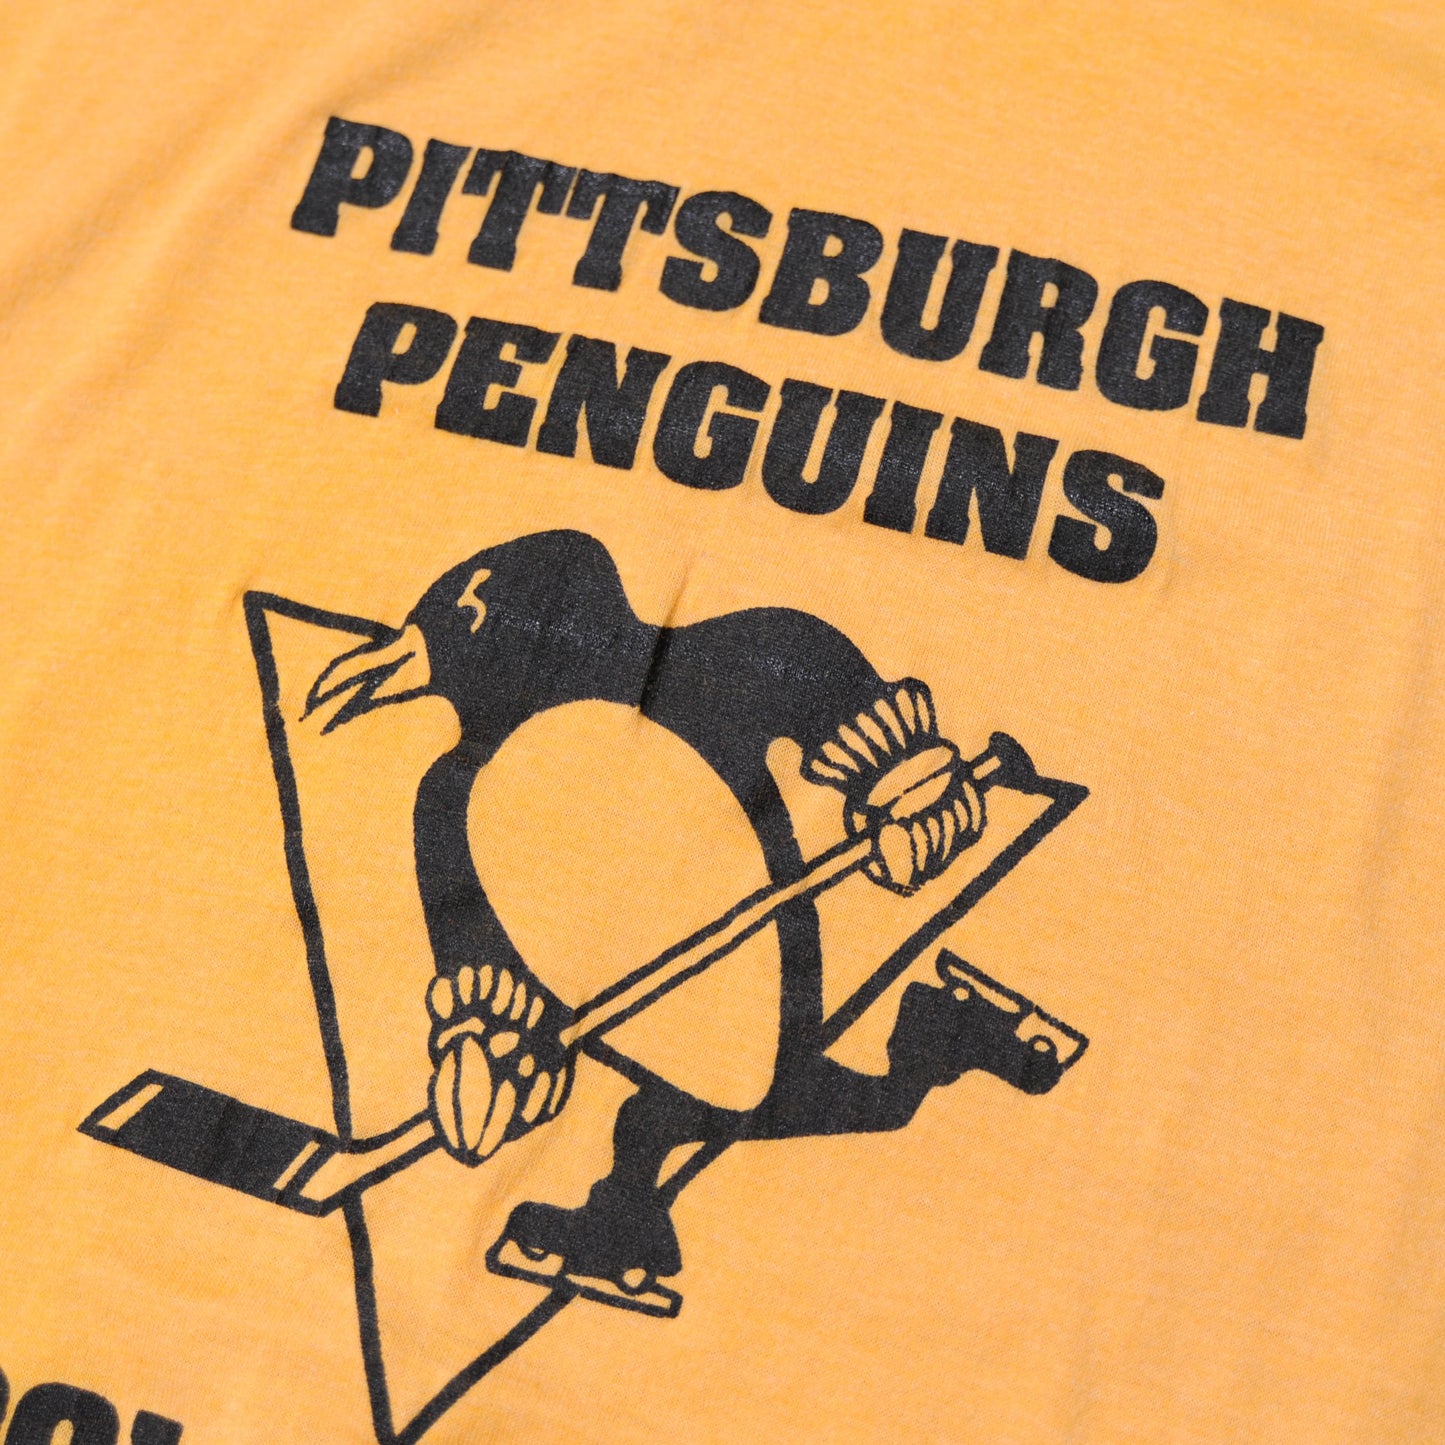 90's PITTSBURGH PENGUINS Tシャツオレンジ(XL)/A2966T-S